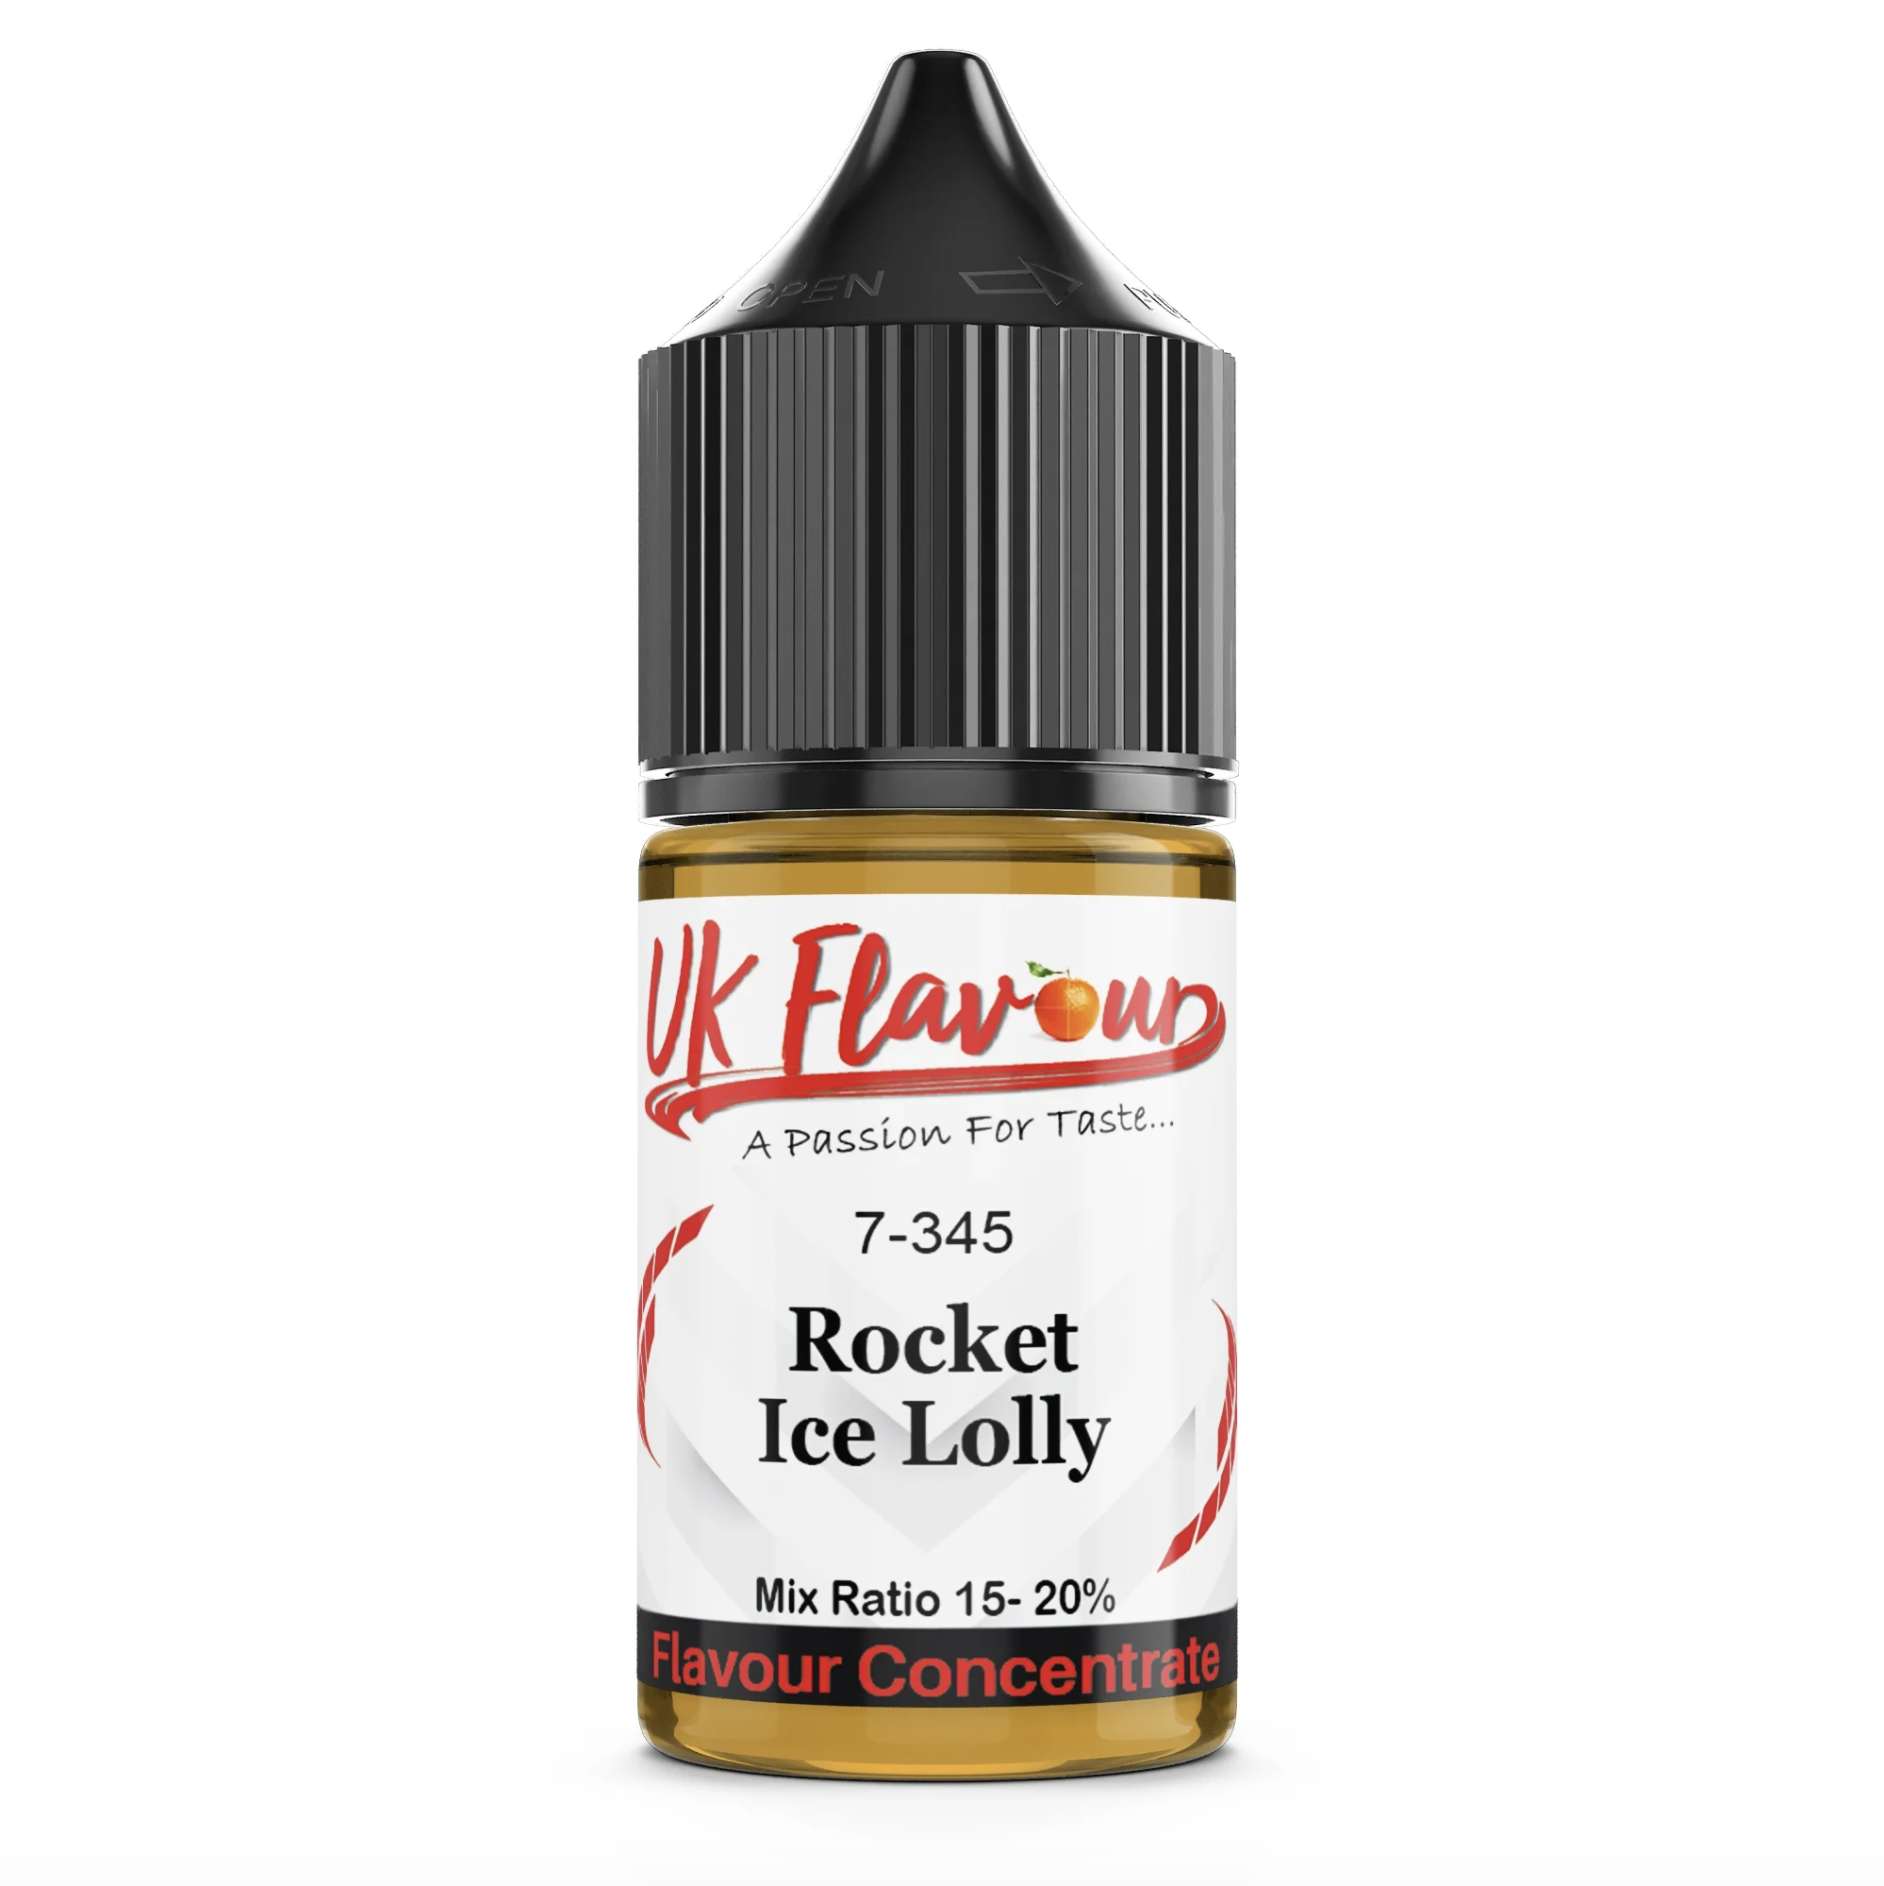 UK Flavour - Flavour concentrates 30ml Rocket Ice Lolly